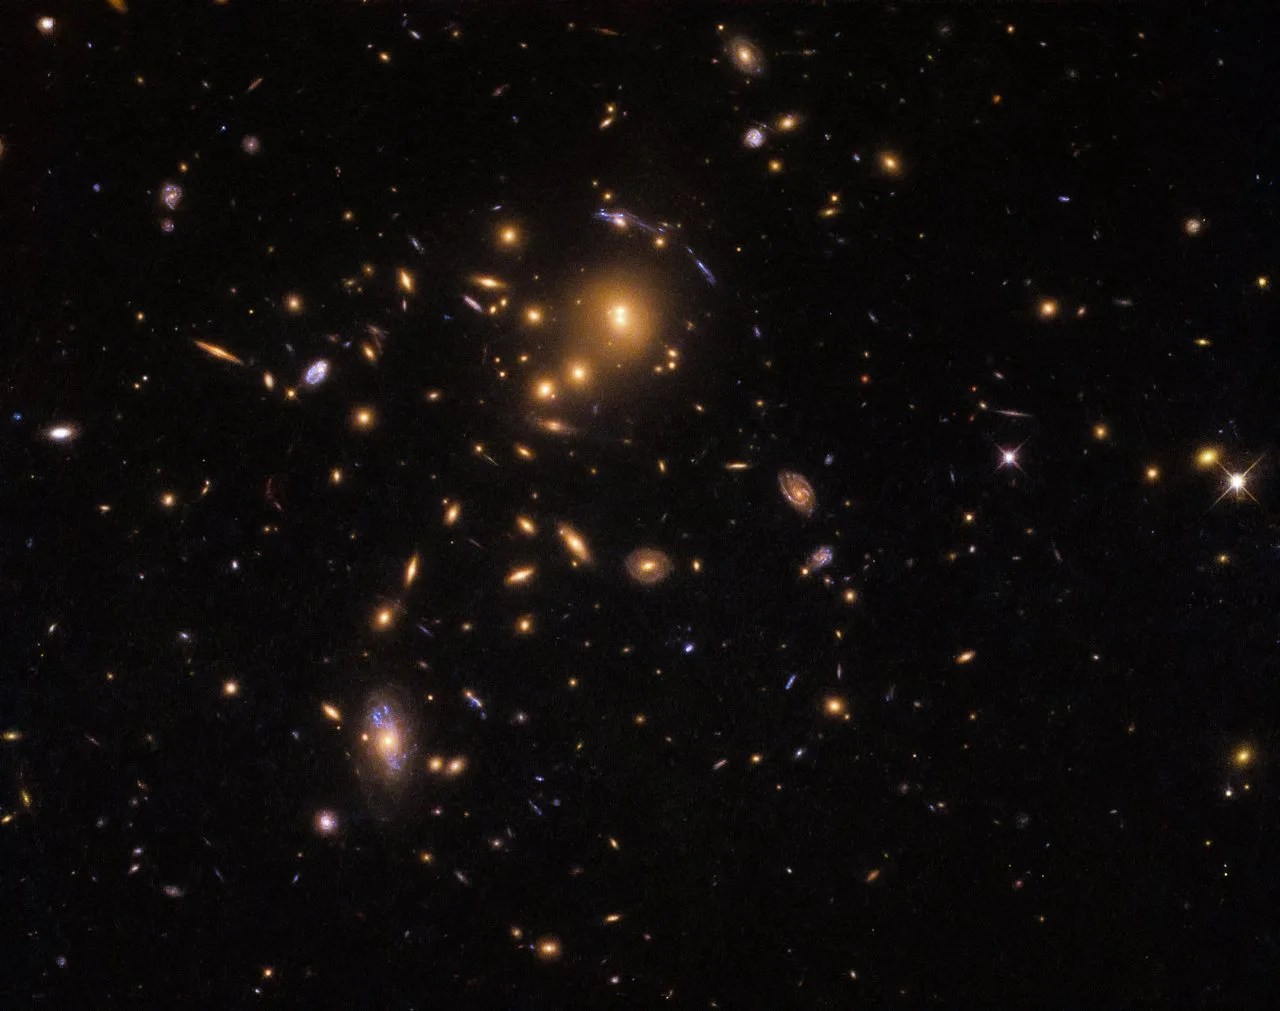 An upper left cluster of orange galaxies with a few blue streaks around them